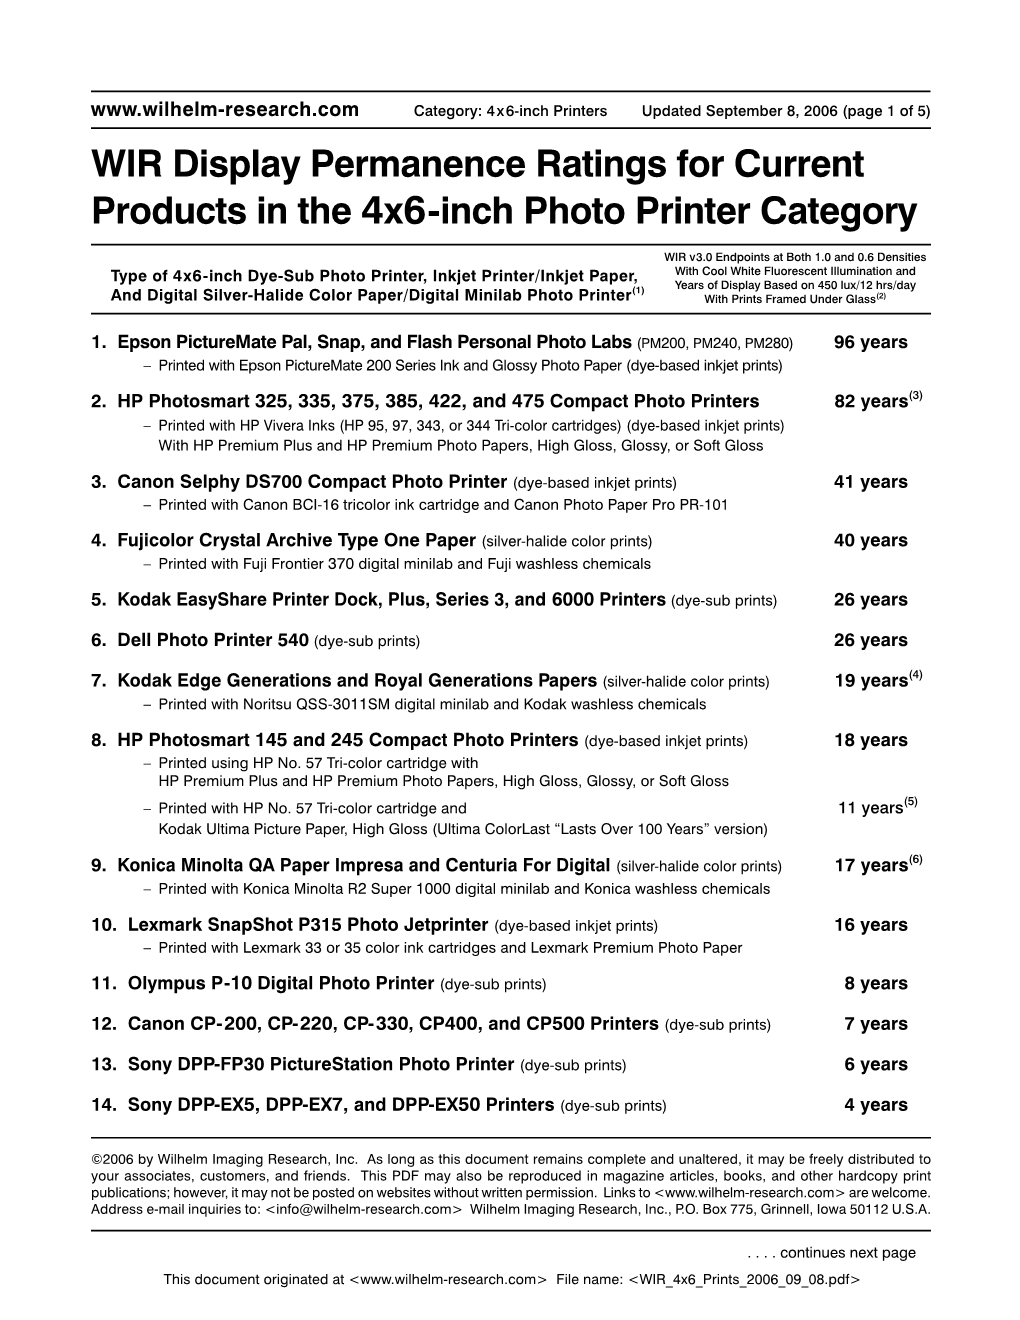 WIR Display Permanence Ratings for Current Products in the 4X6-Inch Photo Printer Category